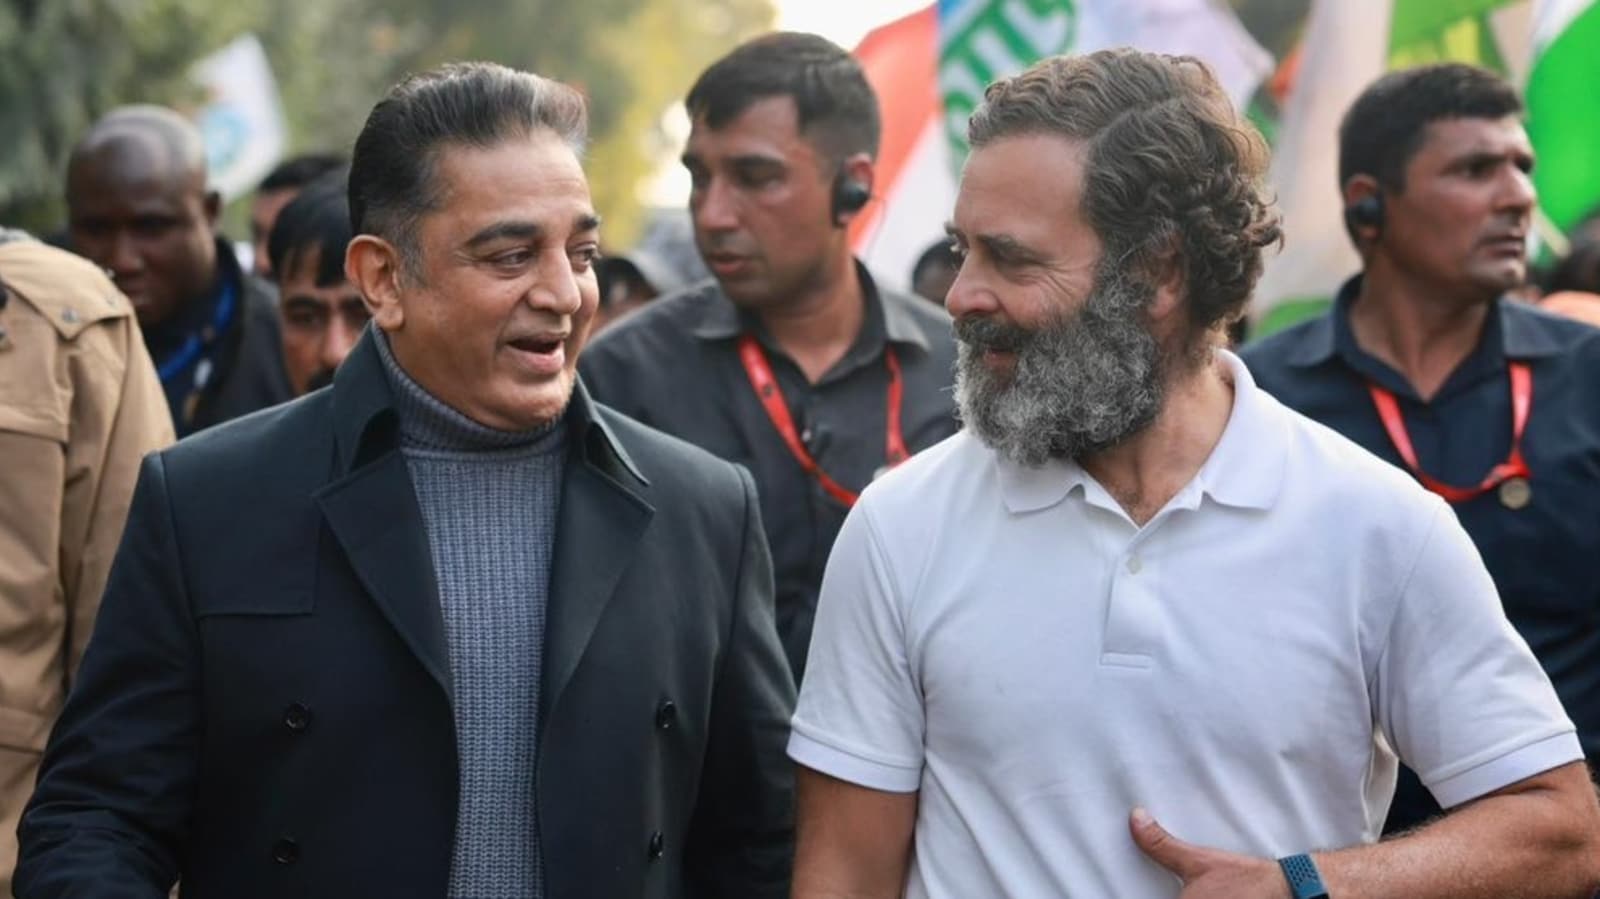 Actor Kamal Haasan says he walked with Politician Rahul Gandhi at Bharat Jodo Yatra to ‘connect glorious past with bright future’